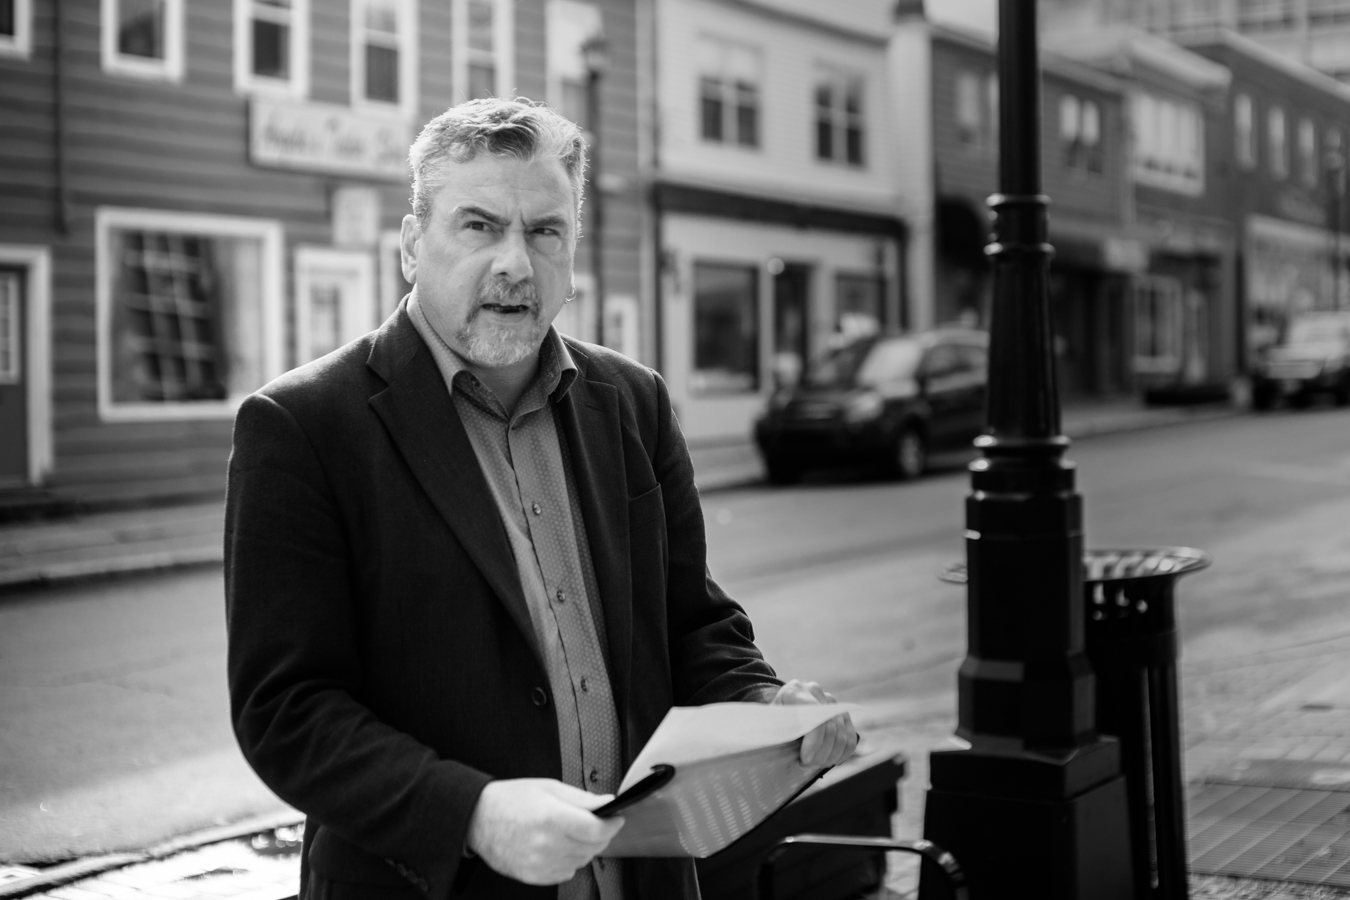 Don Logan - Poet- reciting one of his works - Portland street - Dartmouth NS